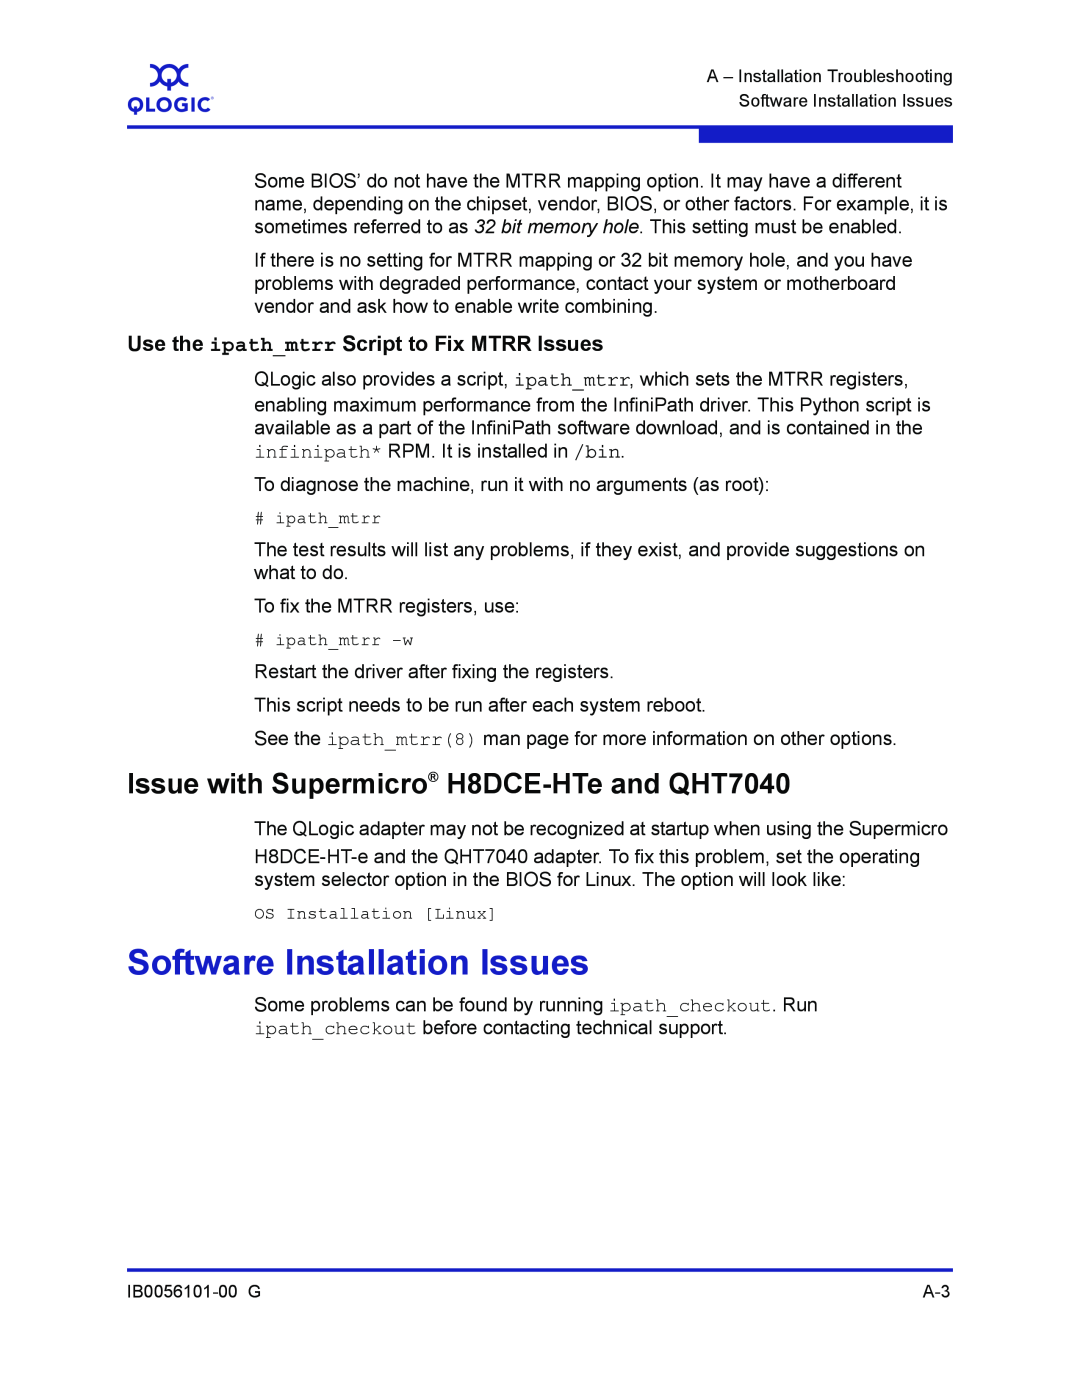 Q-Logic IB0056101-00 G manual Software Installation Issues, Issue with Supermicro H8DCE-HTe and QHT7040 